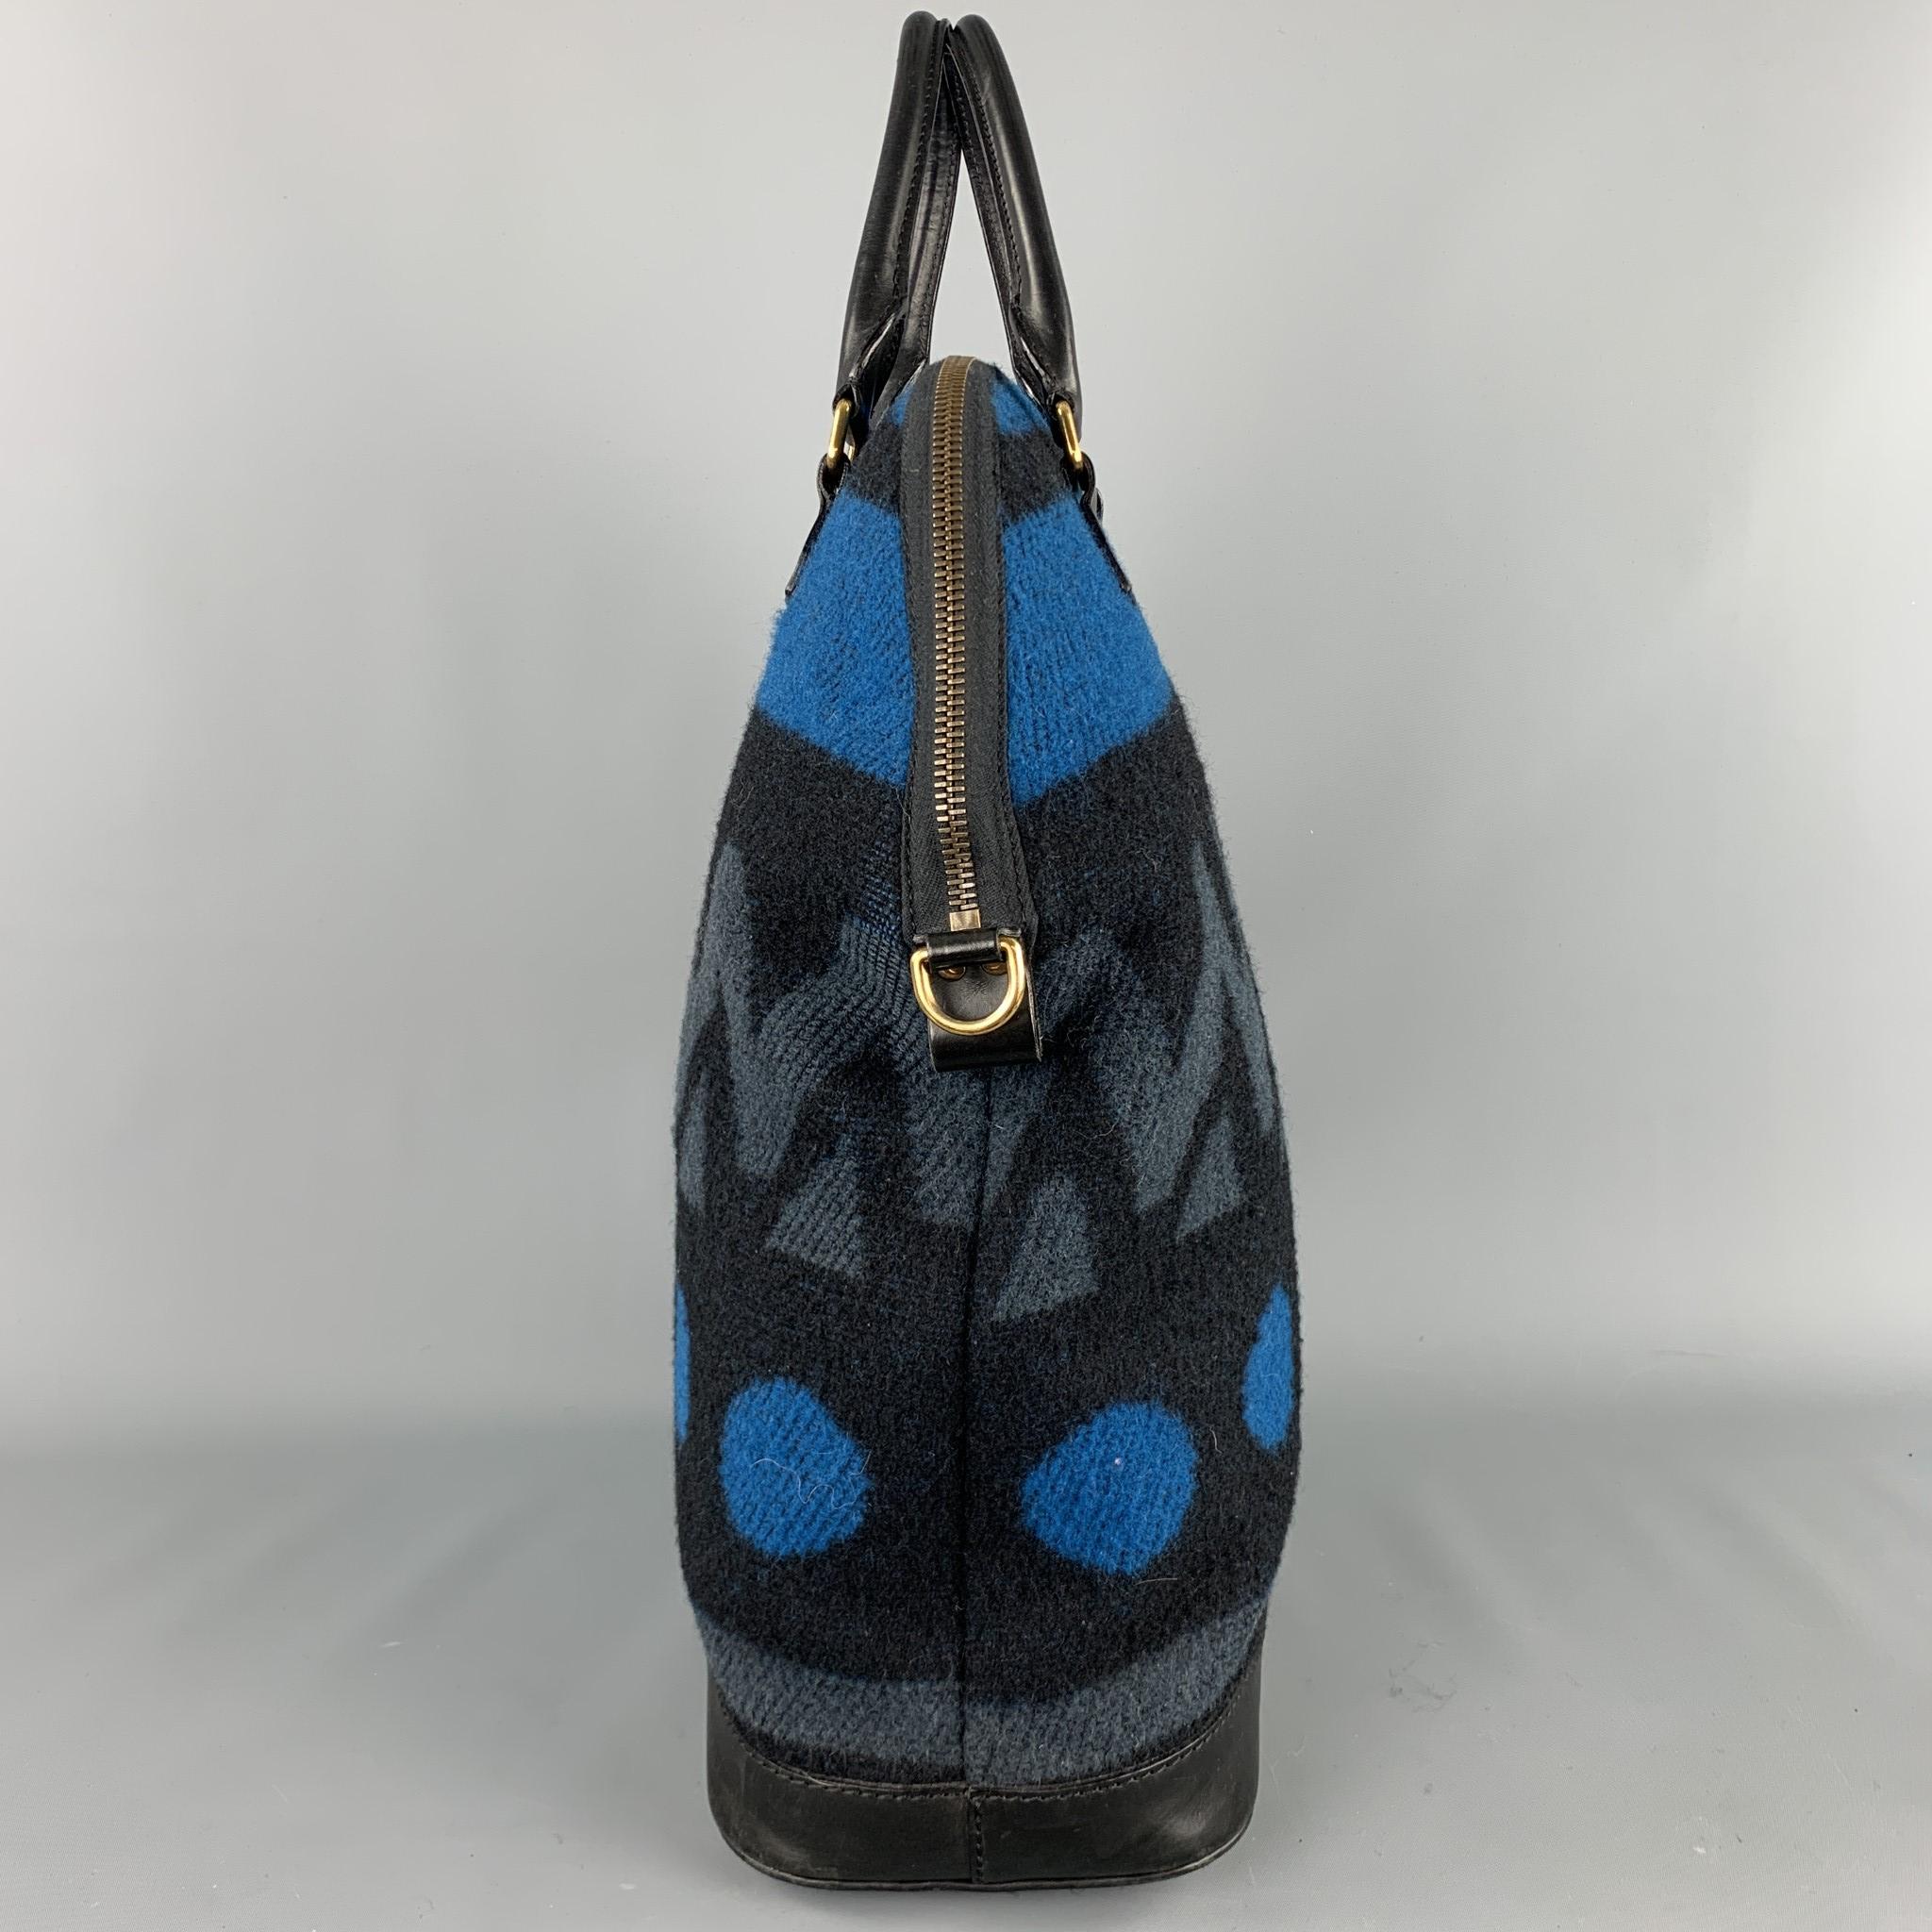 BURBERRY PRORSUM Fall 2014 St Ives Black & Blue Woven Geometric Wool Tote In Excellent Condition In San Francisco, CA